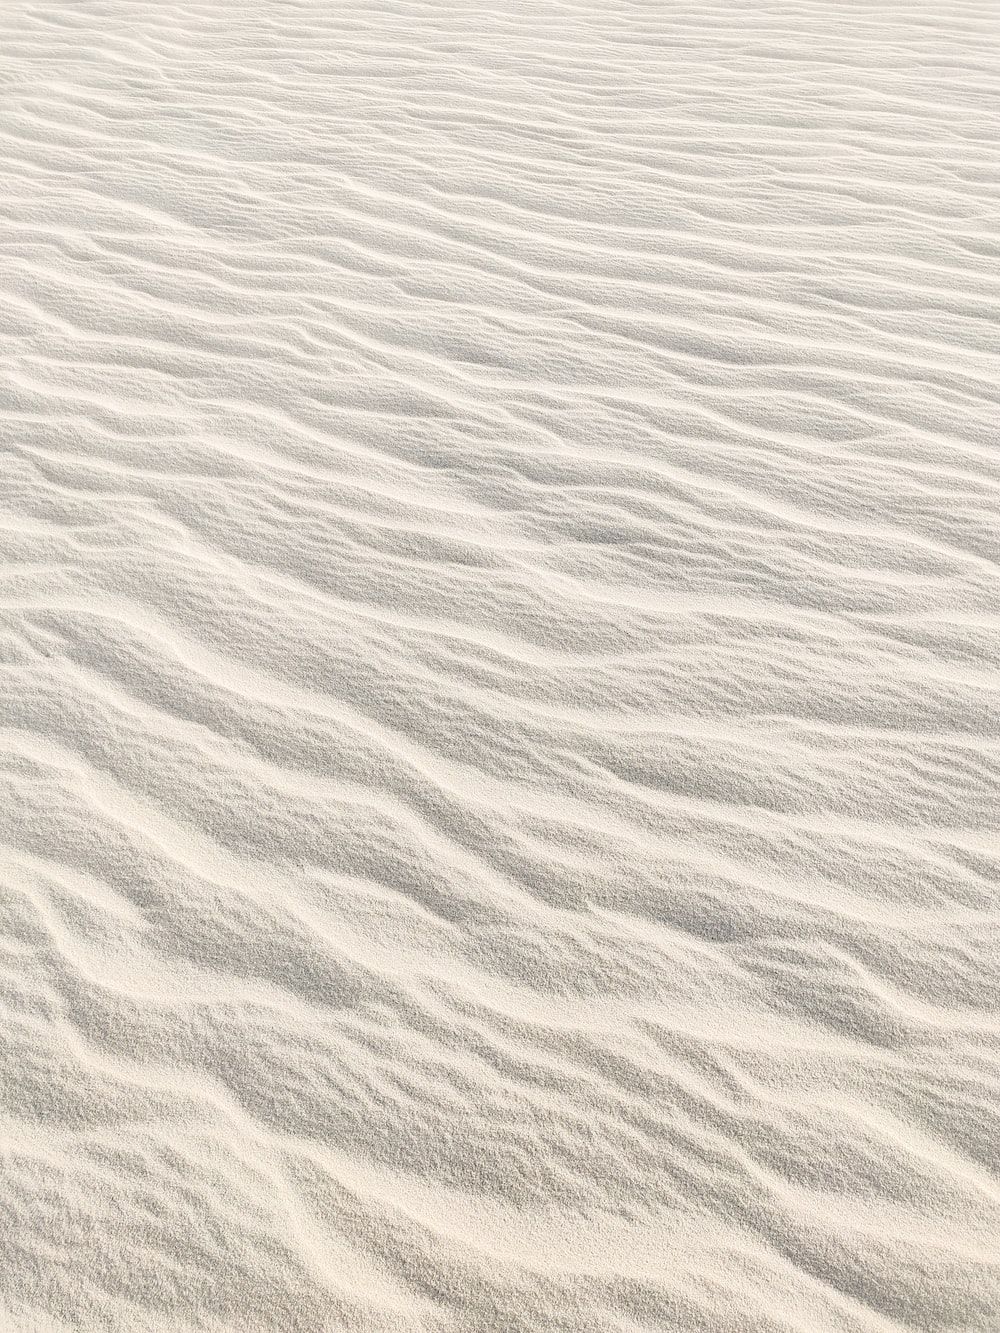 White Sand Picture. Download Free Image